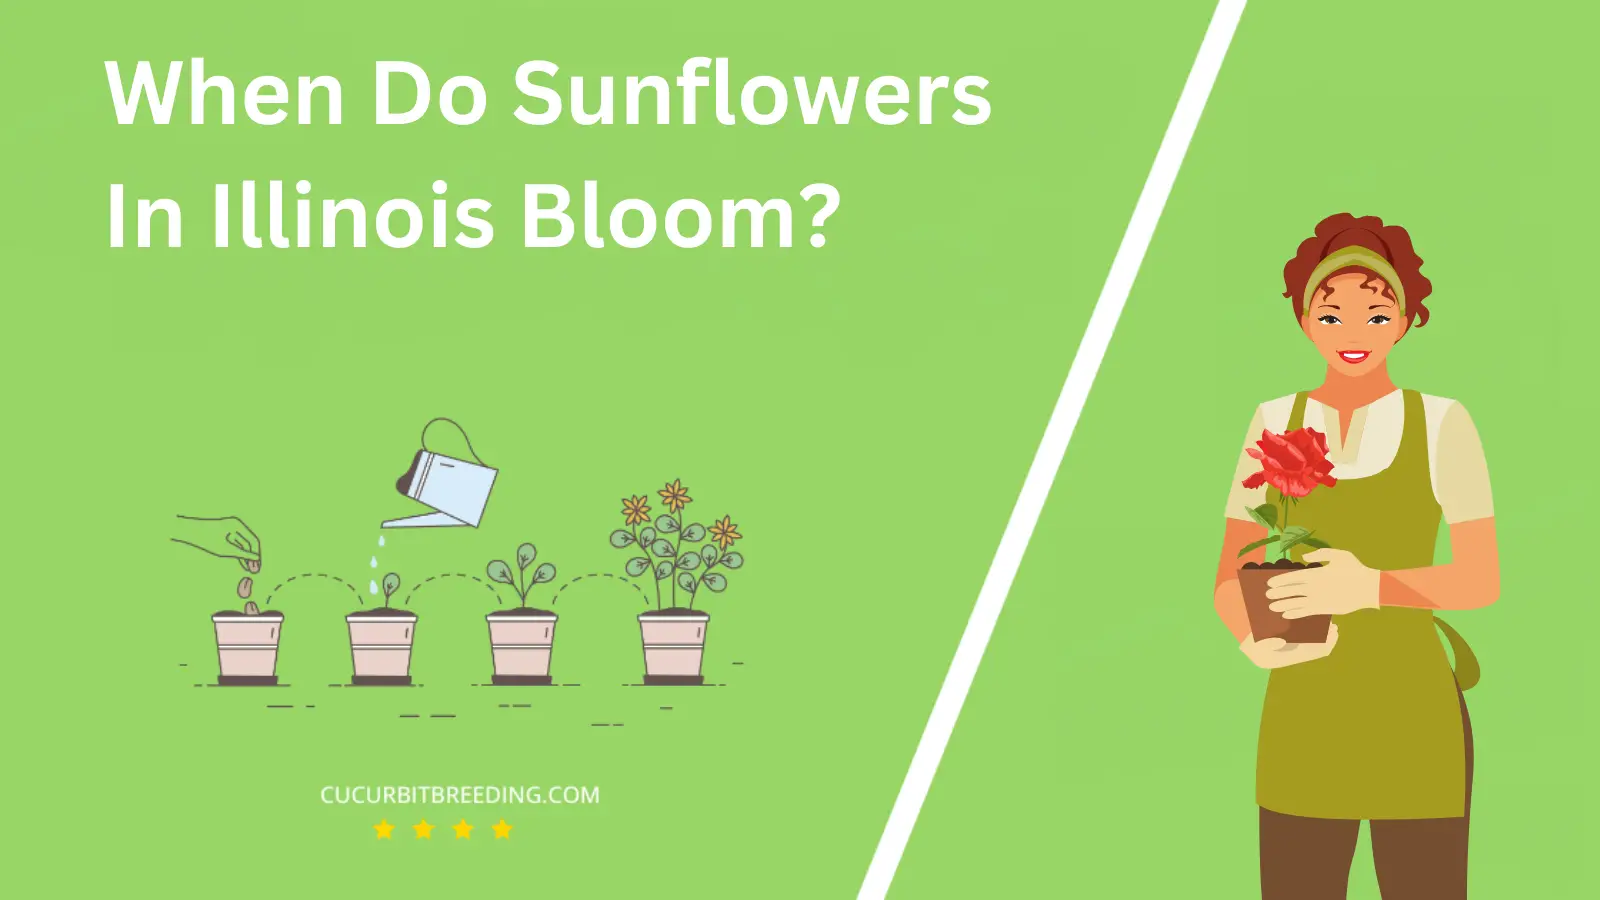 When Do Sunflowers In Illinois Bloom?